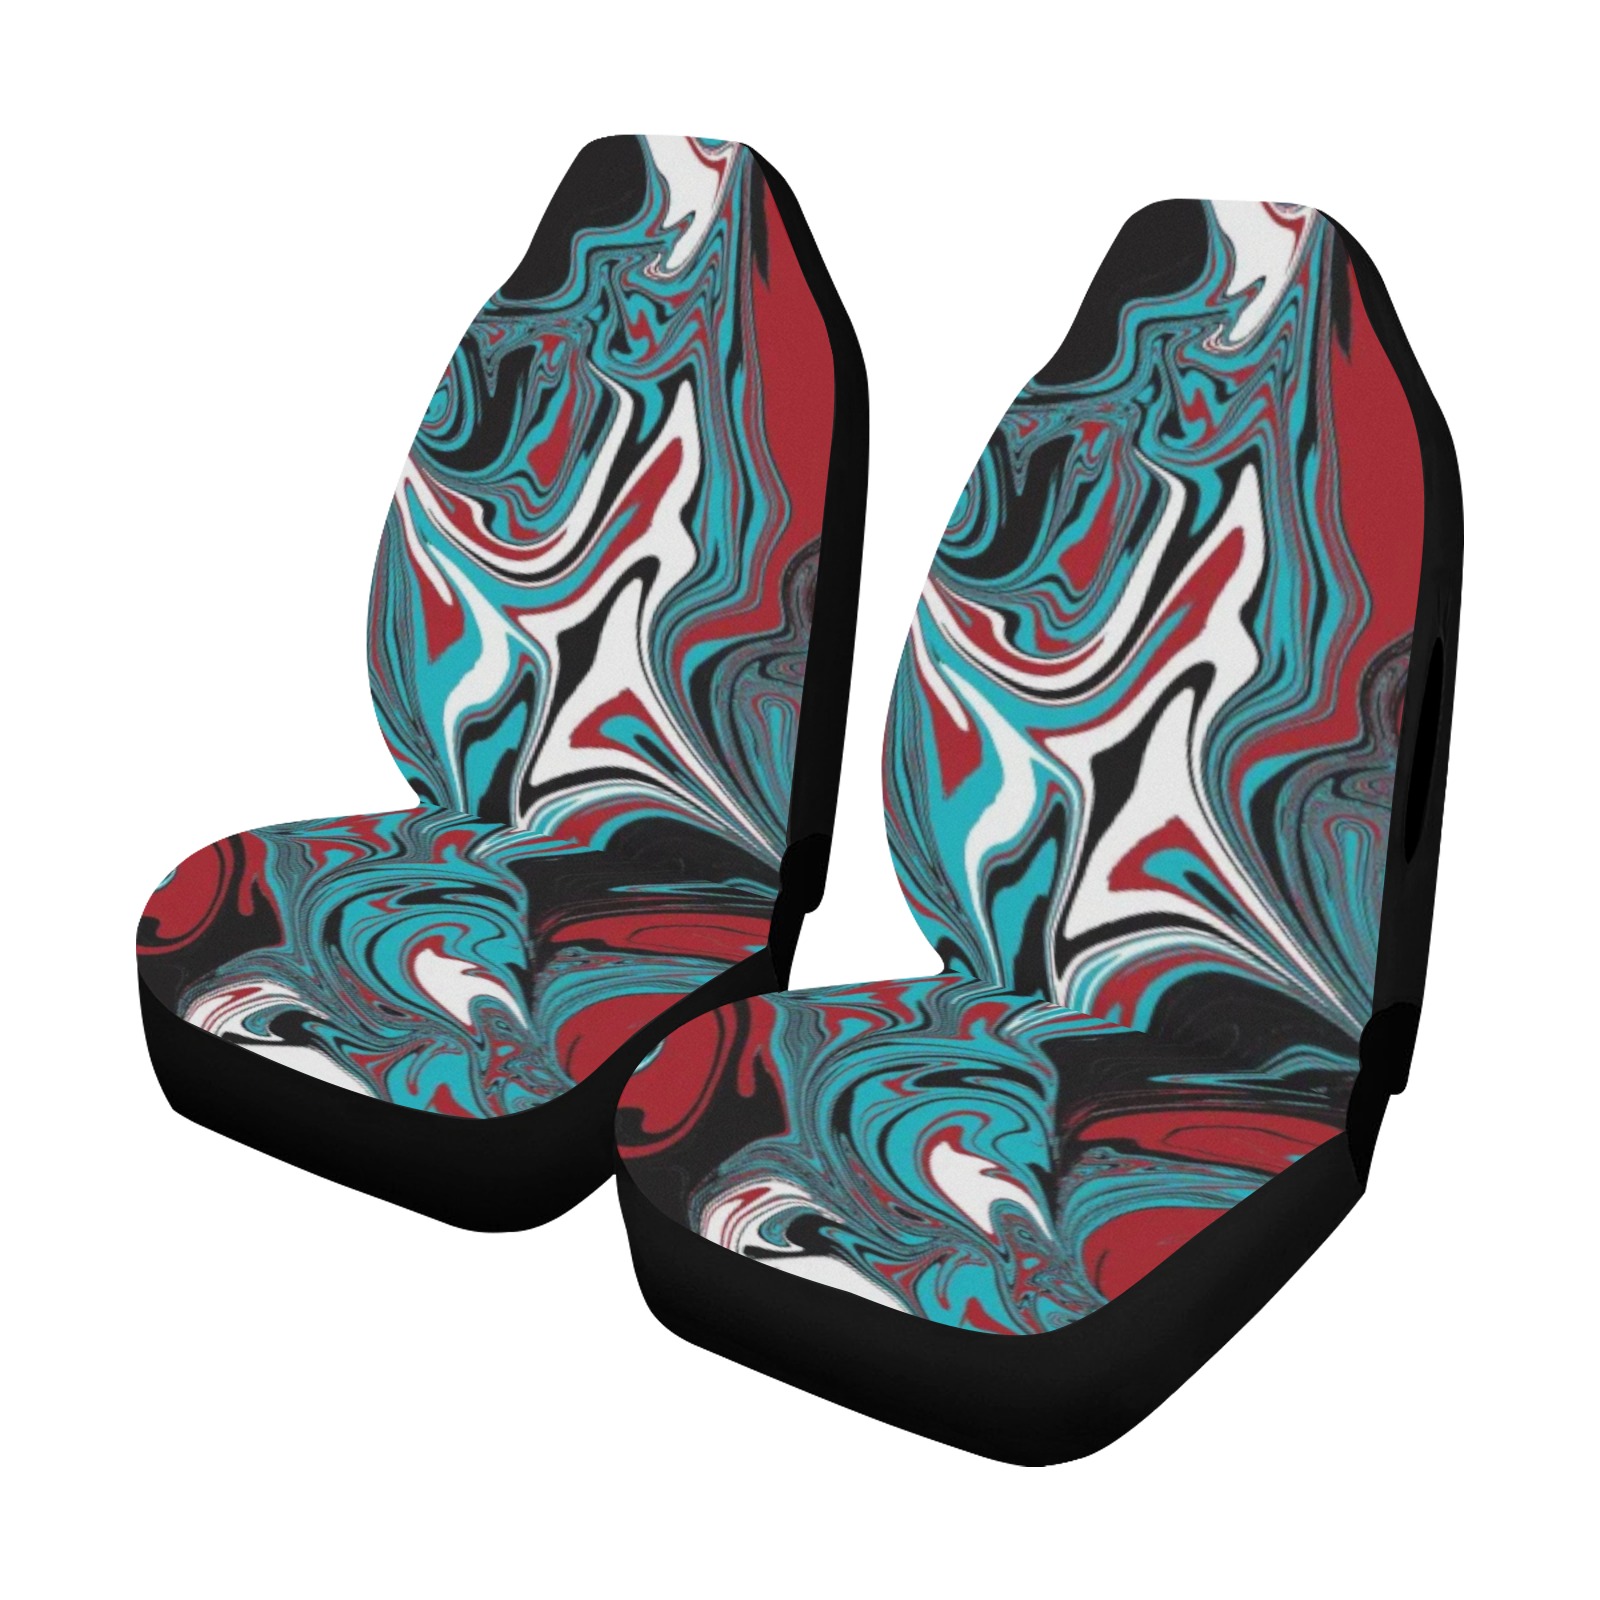 Dark Wave of Colors Car Seat Cover Airbag Compatible (Set of 2)